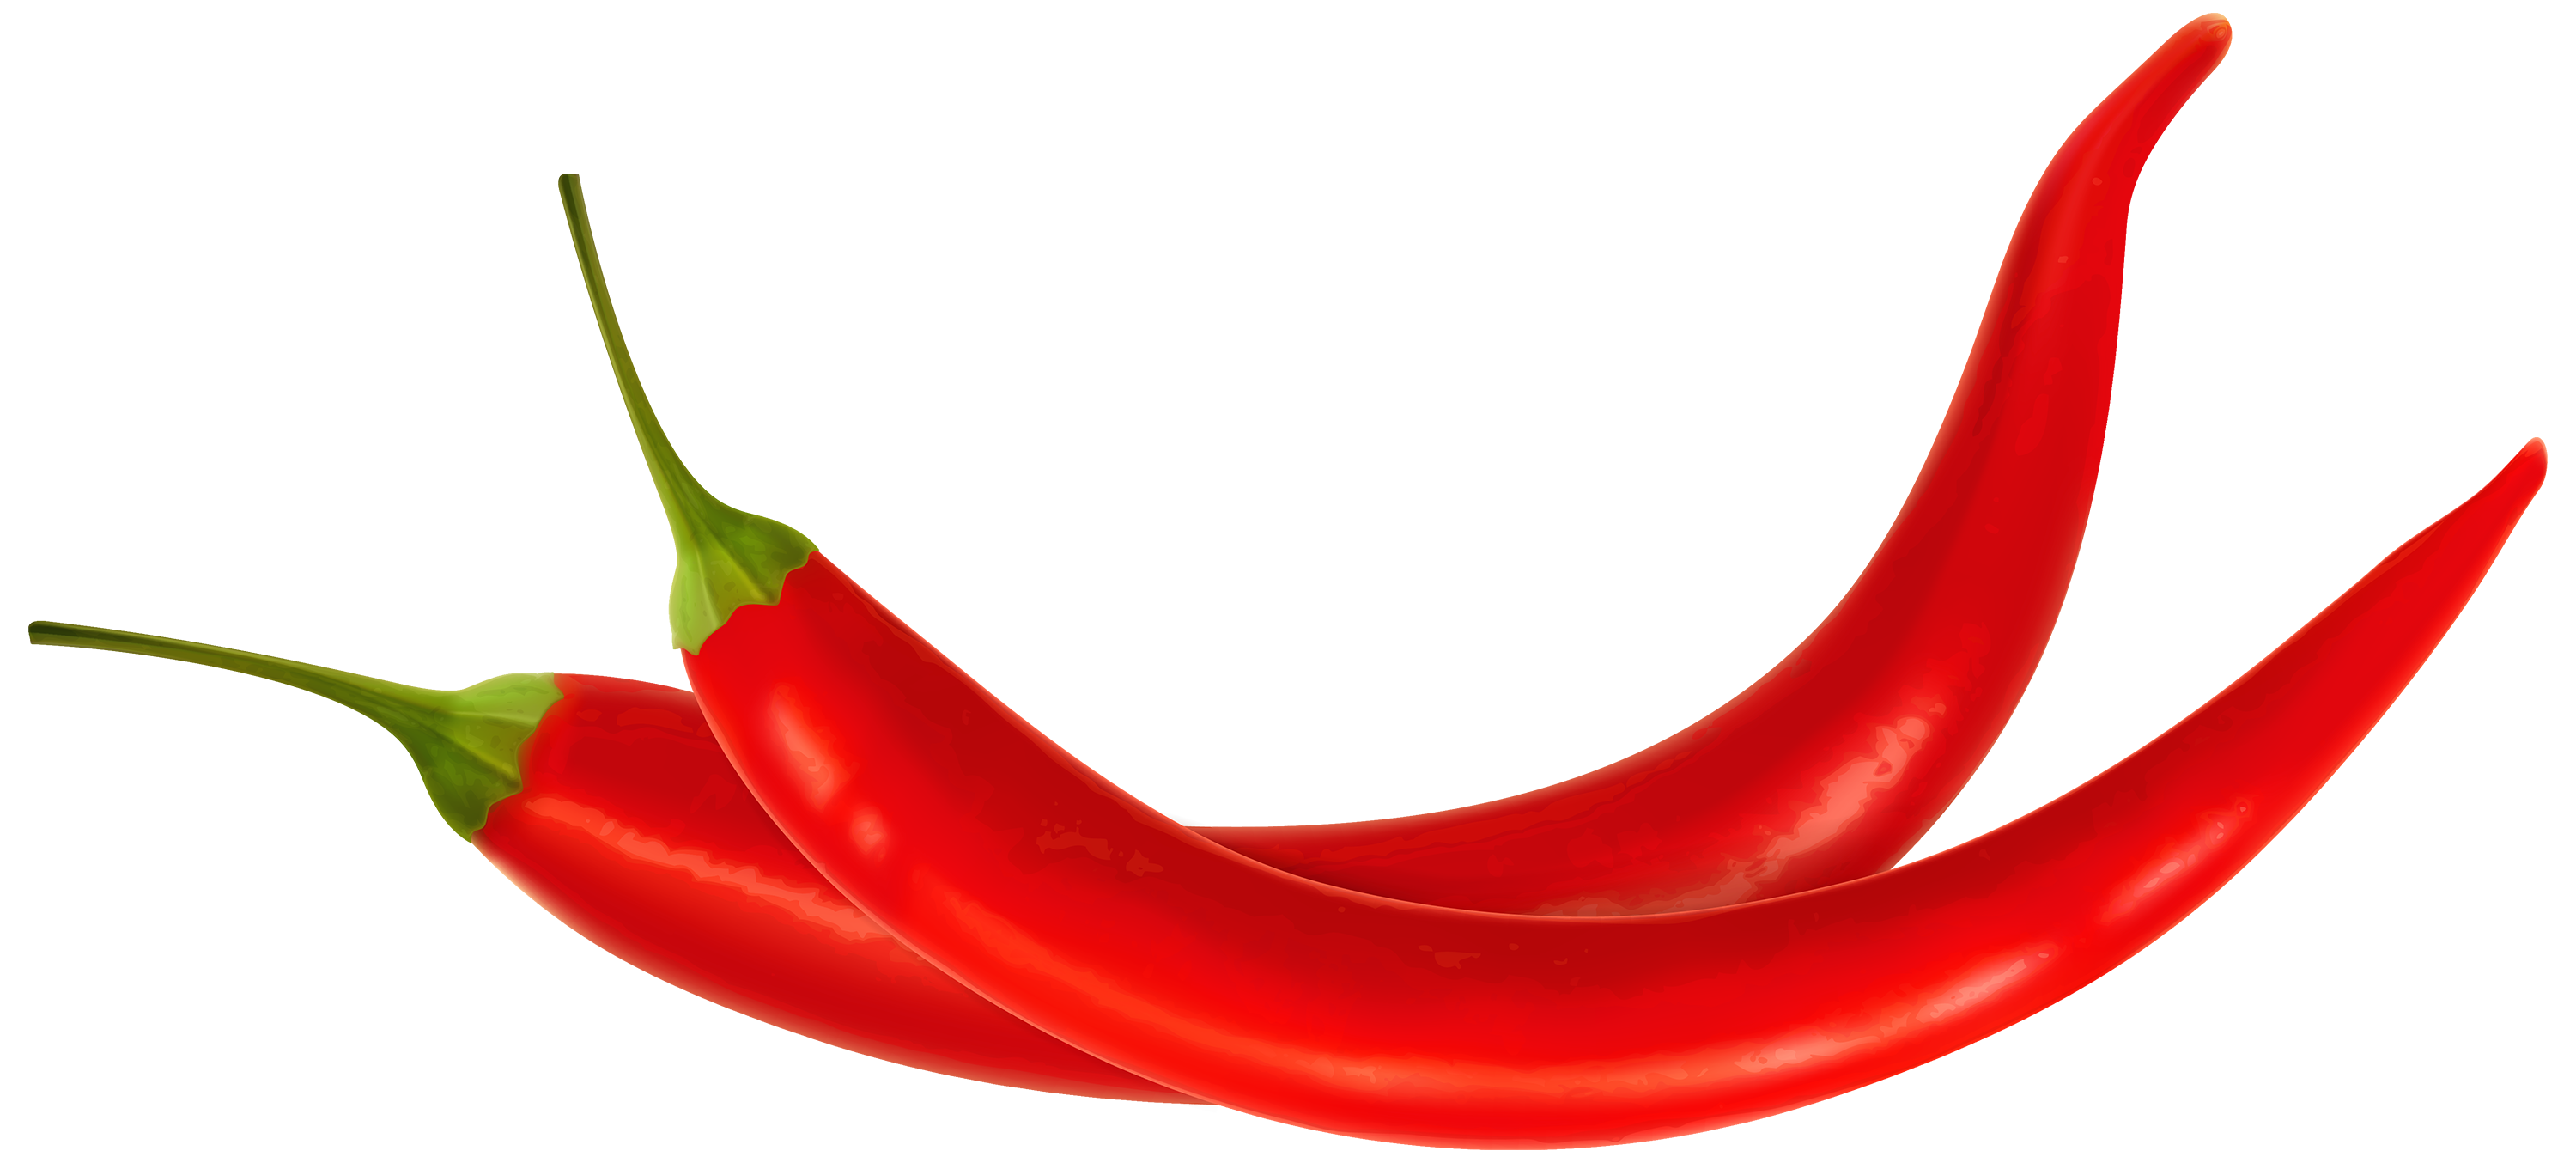 Red chili peppers clipart web clipart